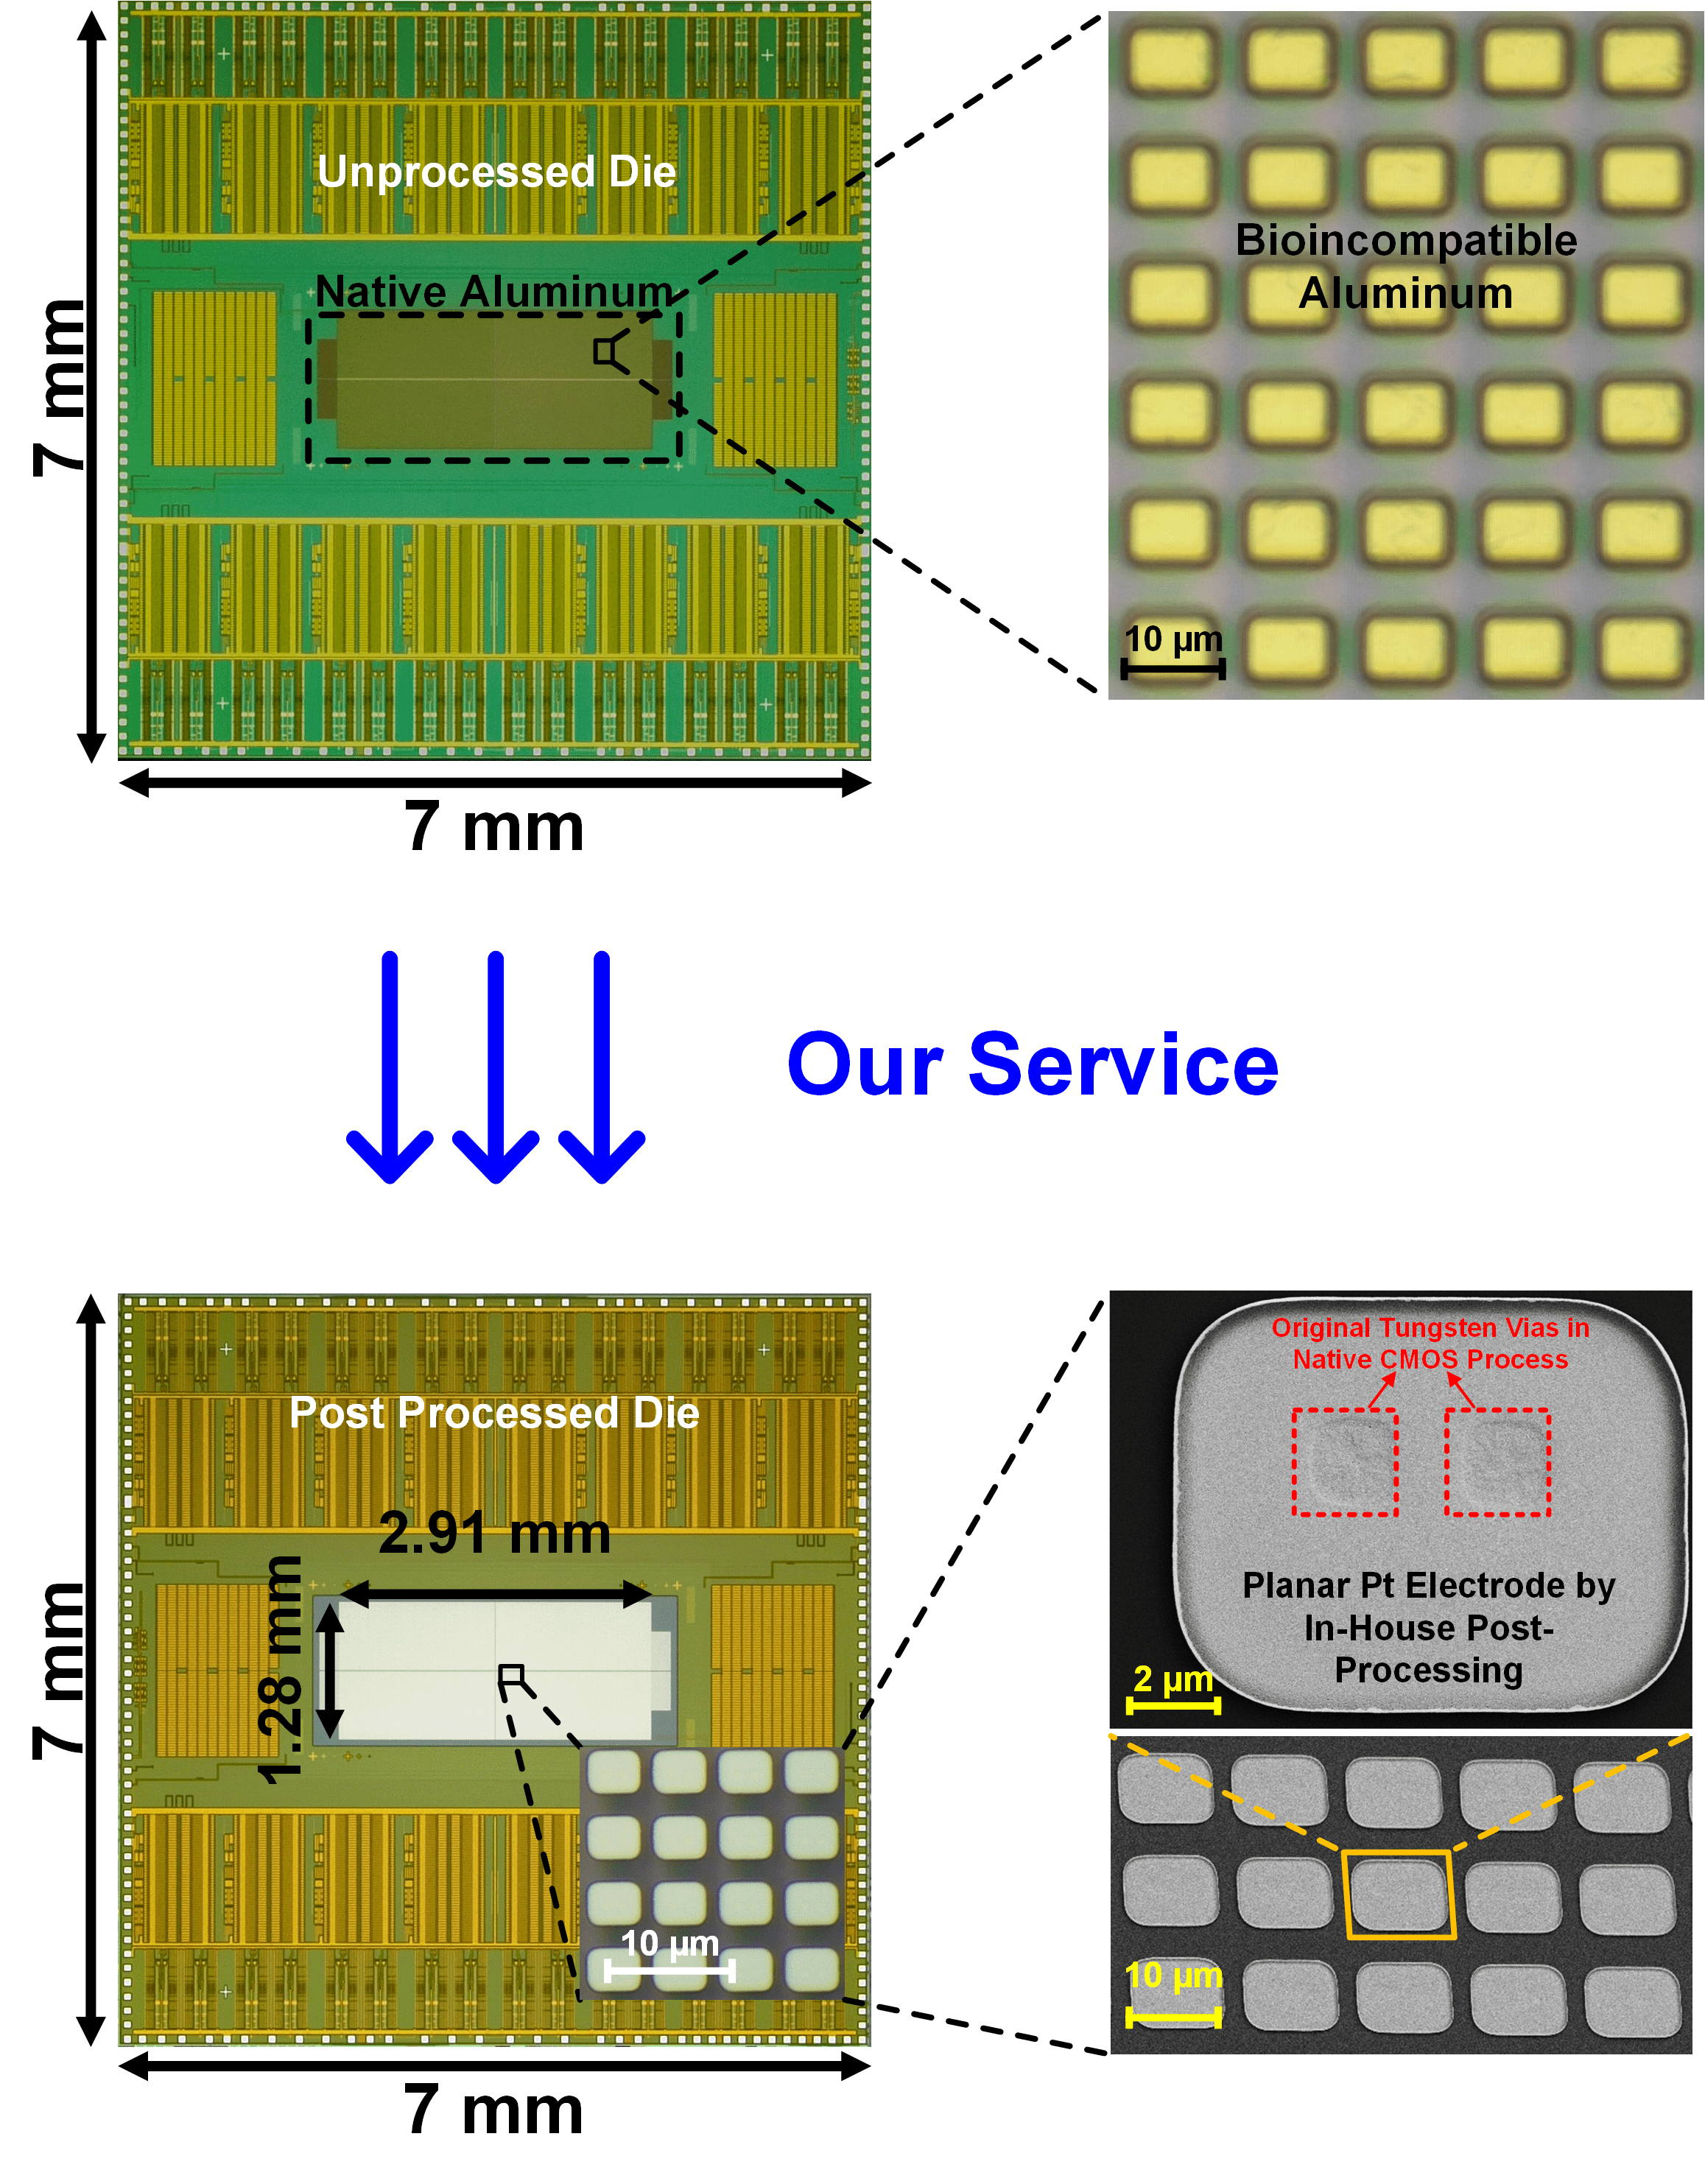 (Top) An unprocessed die with native top metal aluminum electrodes covered by CMOS passivation. (Bottom) Using our in-house post processing we achieve an on-chip platinum microelectrode array with high yield showing a 100% successful uniform biocompatible Pt electrode fabrication on chip with 24k electrically isolated pixels with no peel off. A zoomed in SEM image (bottom right) shows the uniform, planar, and conformal morphology of fabricated on-chip electrodes.